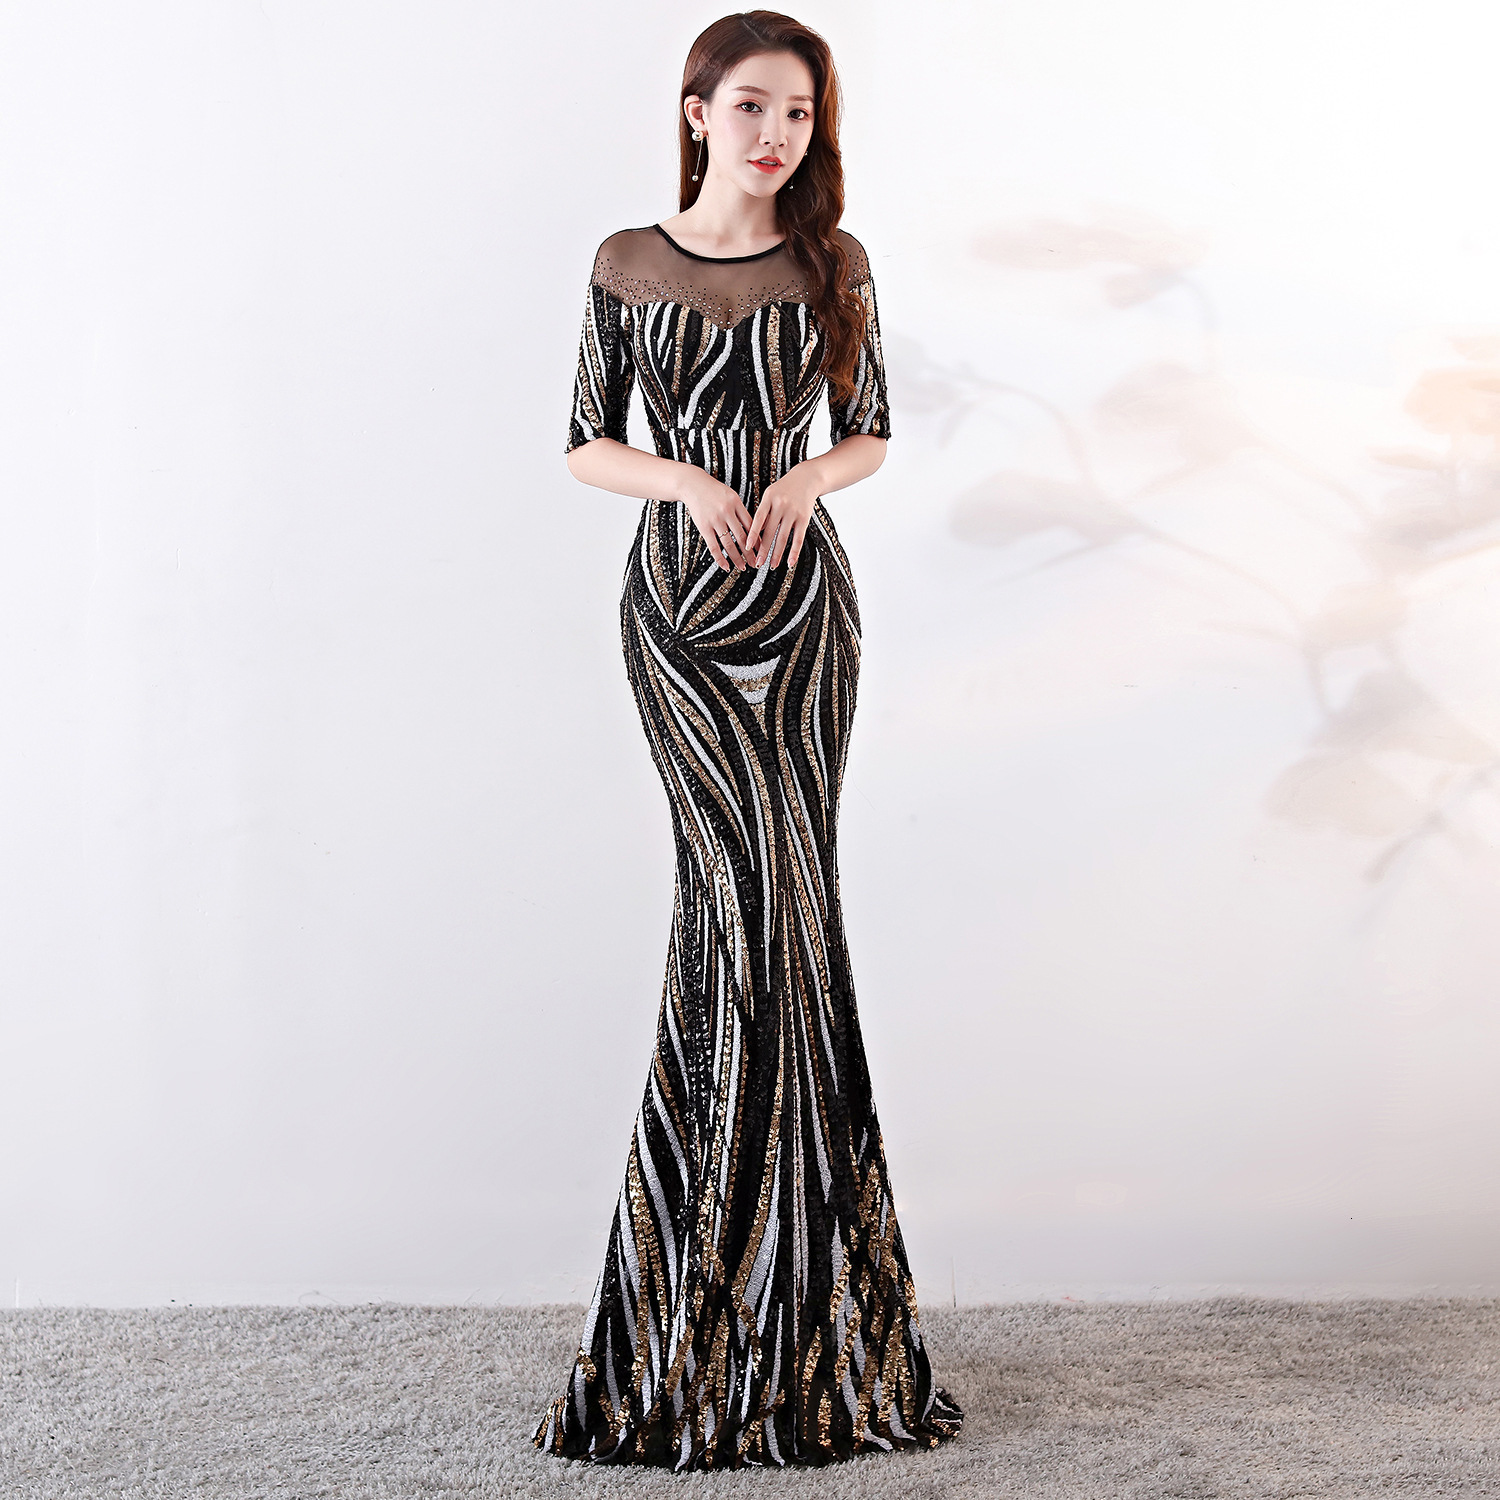 

Women Sexy Backless Sequin Dinner Host Dresses Female Wedding Party Maxi Dress Elegant Fishtail Formal Banquet Gowns G0vd, Champagne